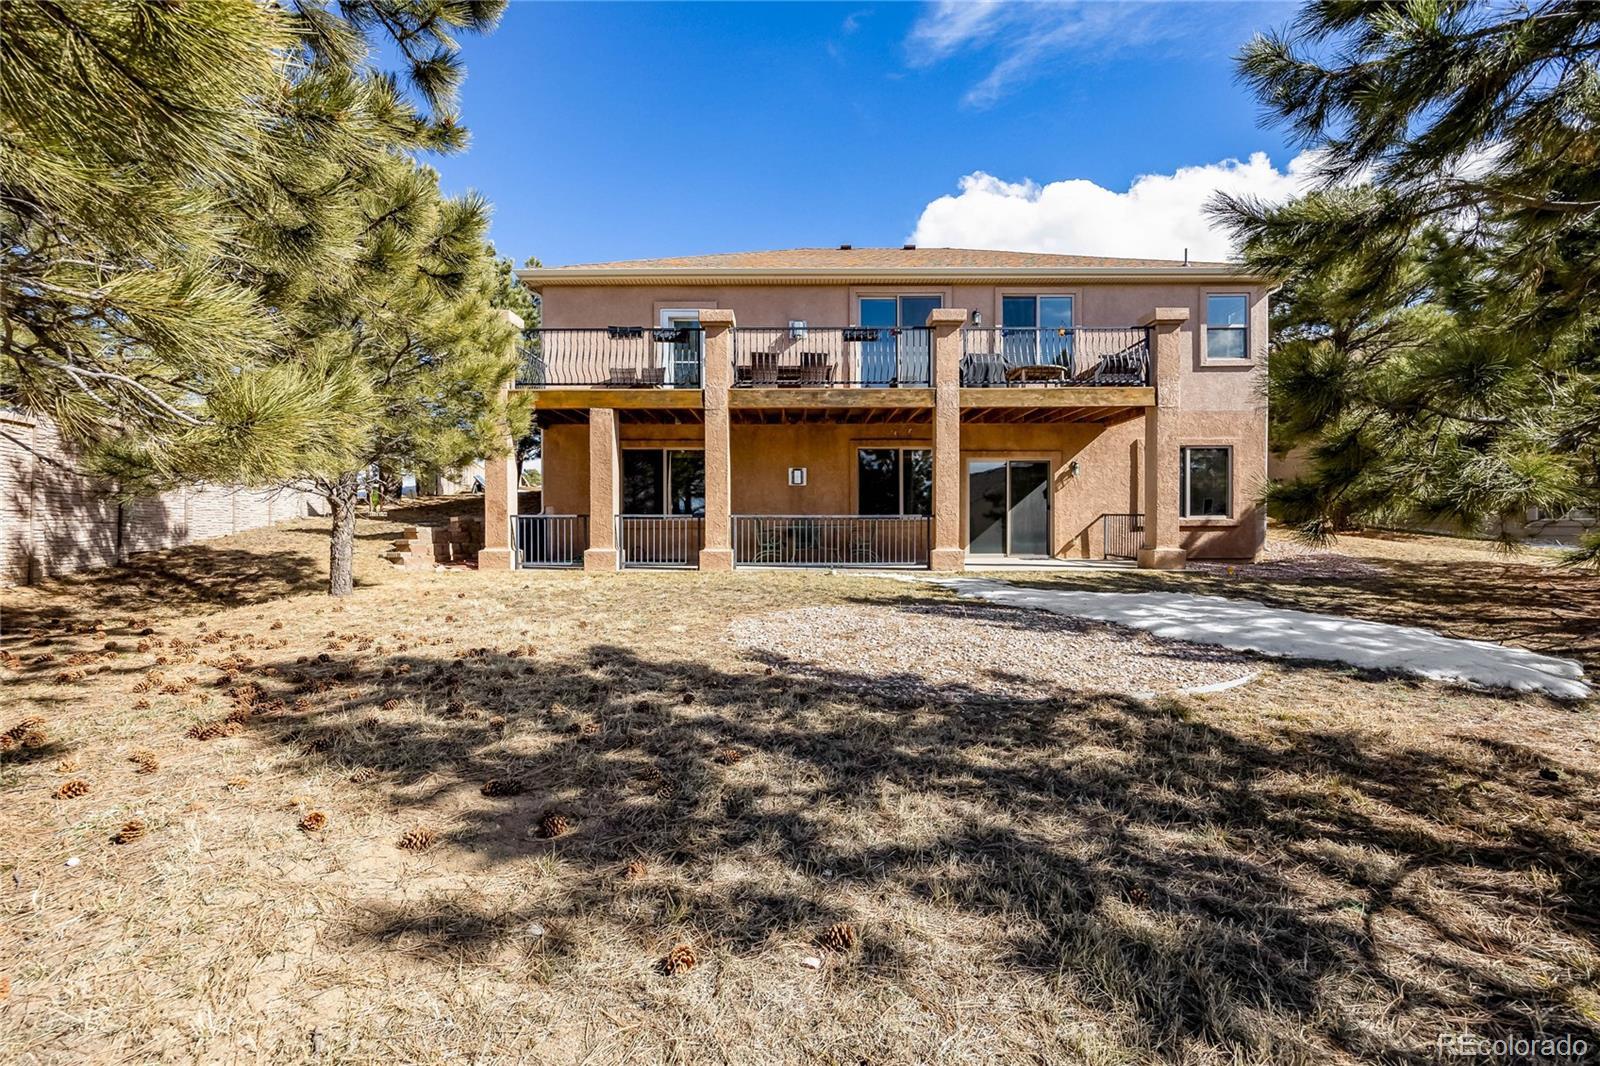 Photo one of 1558 Piney Hill Pt Monument CO 80132 | MLS 8626635